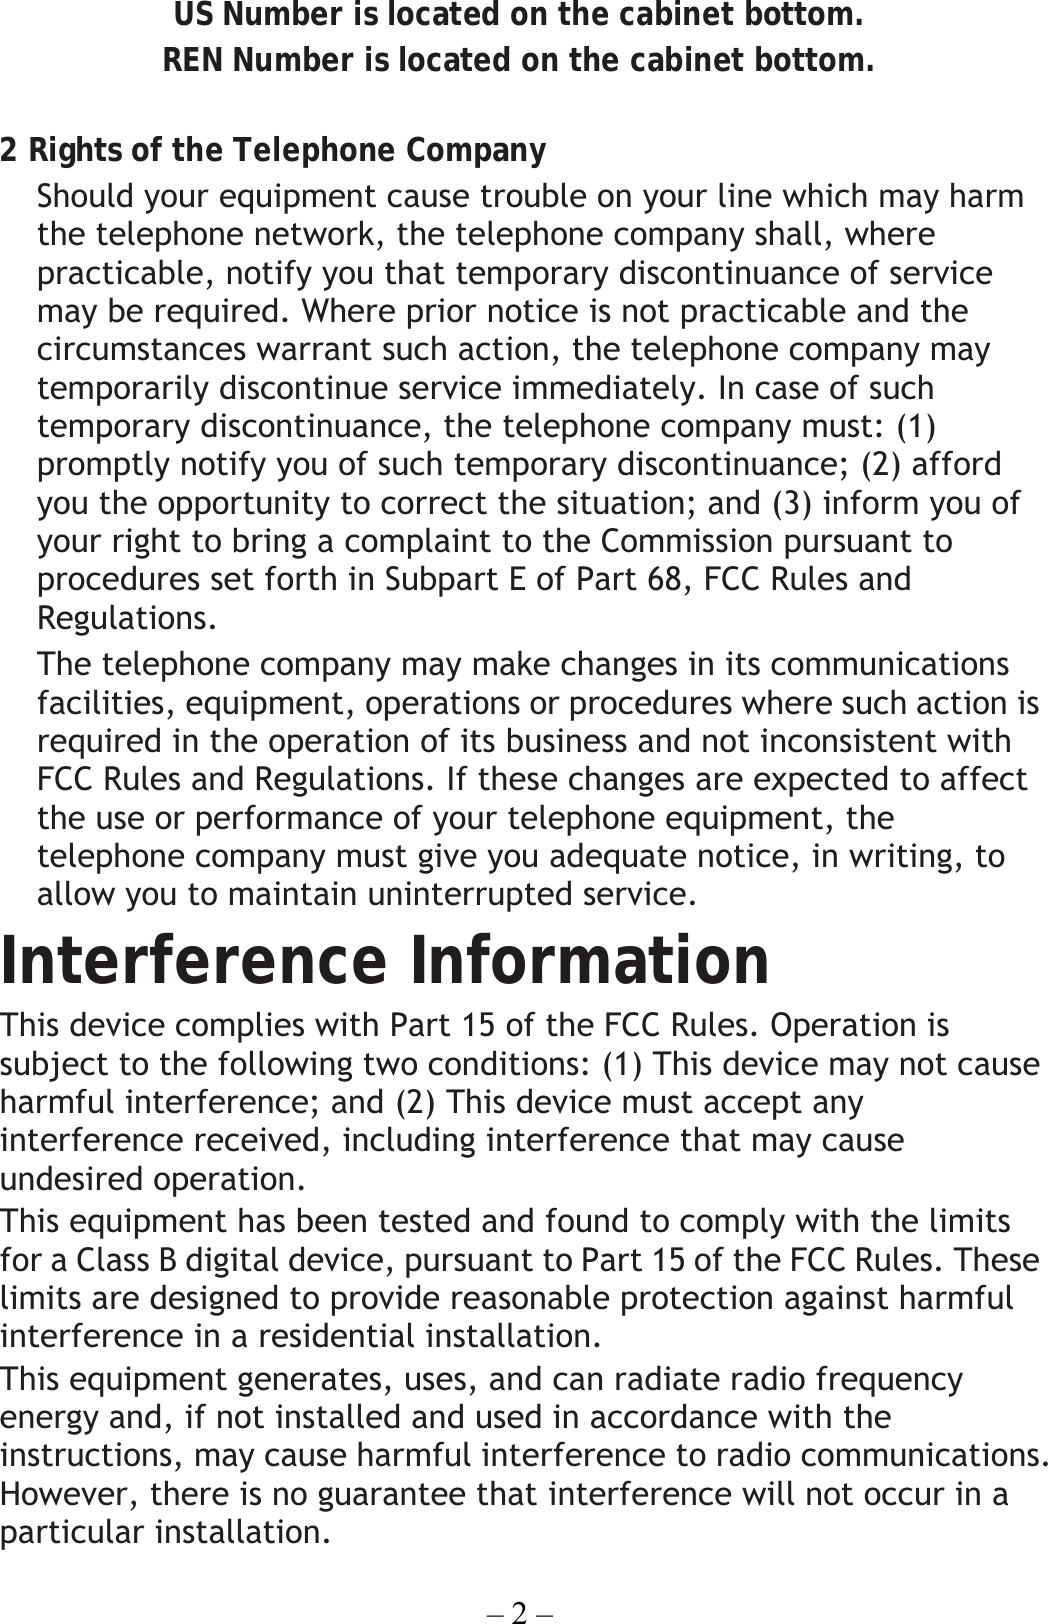 – 2 – US Number is located on the cabinet bottom. REN Number is located on the cabinet bottom.  2 Rights of the Telephone Company   Should your equipment cause trouble on your line which may harm the telephone network, the telephone company shall, where practicable, notify you that temporary discontinuance of service may be required. Where prior notice is not practicable and the circumstances warrant such action, the telephone company may temporarily discontinue service immediately. In case of such temporary discontinuance, the telephone company must: (1) promptly notify you of such temporary discontinuance; (2) afford you the opportunity to correct the situation; and (3) inform you of your right to bring a complaint to the Commission pursuant to procedures set forth in Subpart E of Part 68, FCC Rules and Regulations. The telephone company may make changes in its communications facilities, equipment, operations or procedures where such action is required in the operation of its business and not inconsistent with FCC Rules and Regulations. If these changes are expected to affect the use or performance of your telephone equipment, the telephone company must give you adequate notice, in writing, to allow you to maintain uninterrupted service. Interference Information This device complies with Part 15 of the FCC Rules. Operation is subject to the following two conditions: (1) This device may not cause harmful interference; and (2) This device must accept any interference received, including interference that may cause undesired operation. This equipment has been tested and found to comply with the limits for a Class B digital device, pursuant to Part 15 of the FCC Rules. These limits are designed to provide reasonable protection against harmful interference in a residential installation. This equipment generates, uses, and can radiate radio frequency energy and, if not installed and used in accordance with the instructions, may cause harmful interference to radio communications. However, there is no guarantee that interference will not occur in a particular installation. 